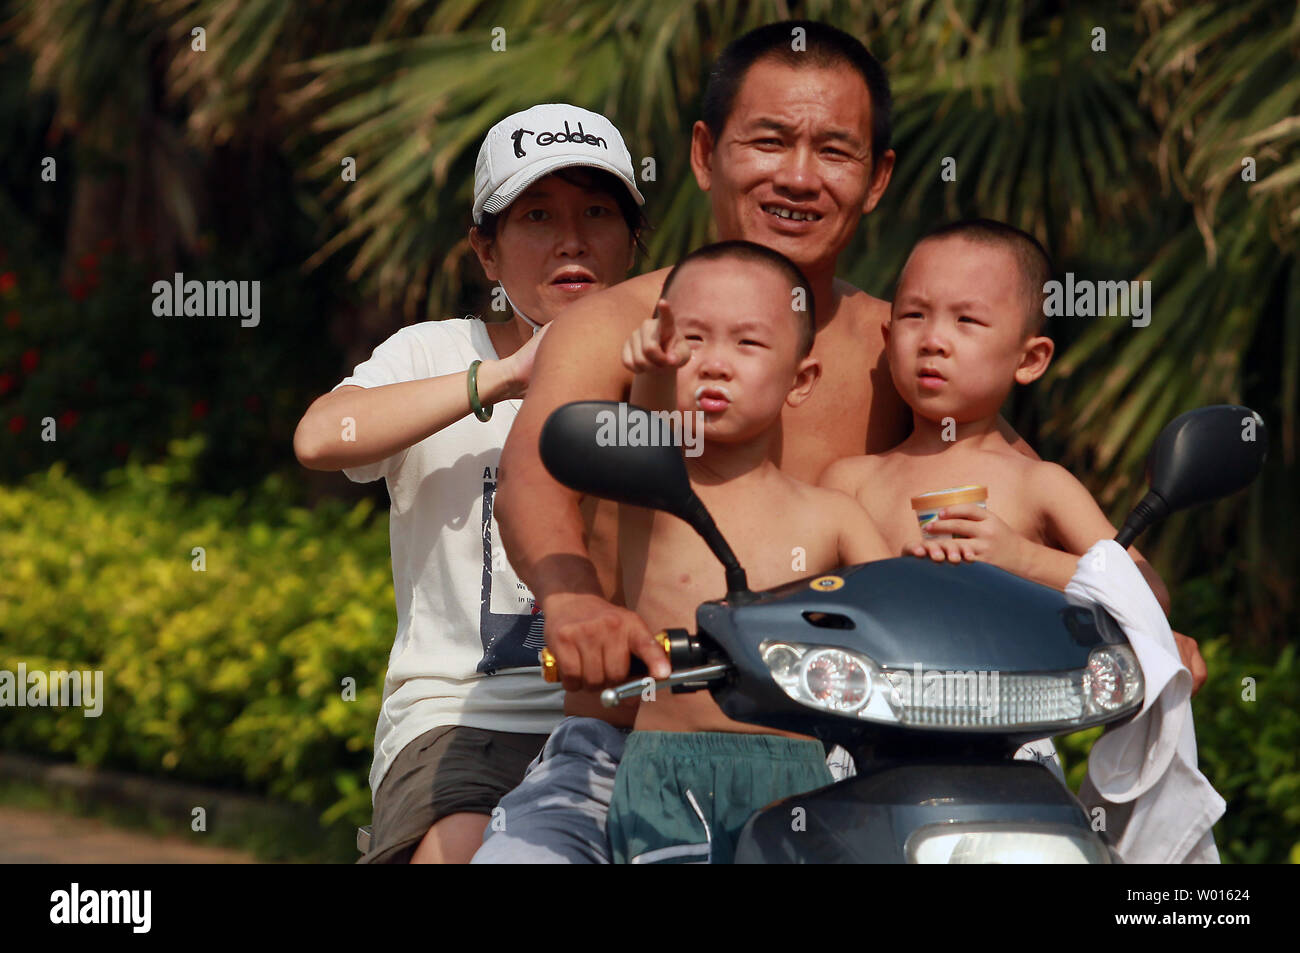 A Chinese family rides past a scenic lake in Beijing on September 14, 2014.  With more than 1.3 billion people, China is the world's most populous country.  China's total population of 1.3 billion continues to grow, but the nation's working-age population - those between 16 and 59 - has dropped two years in a row, raising concerns about a shrinking labor force and its economic consequences.     UPI/Stephen Shaver Stock Photo